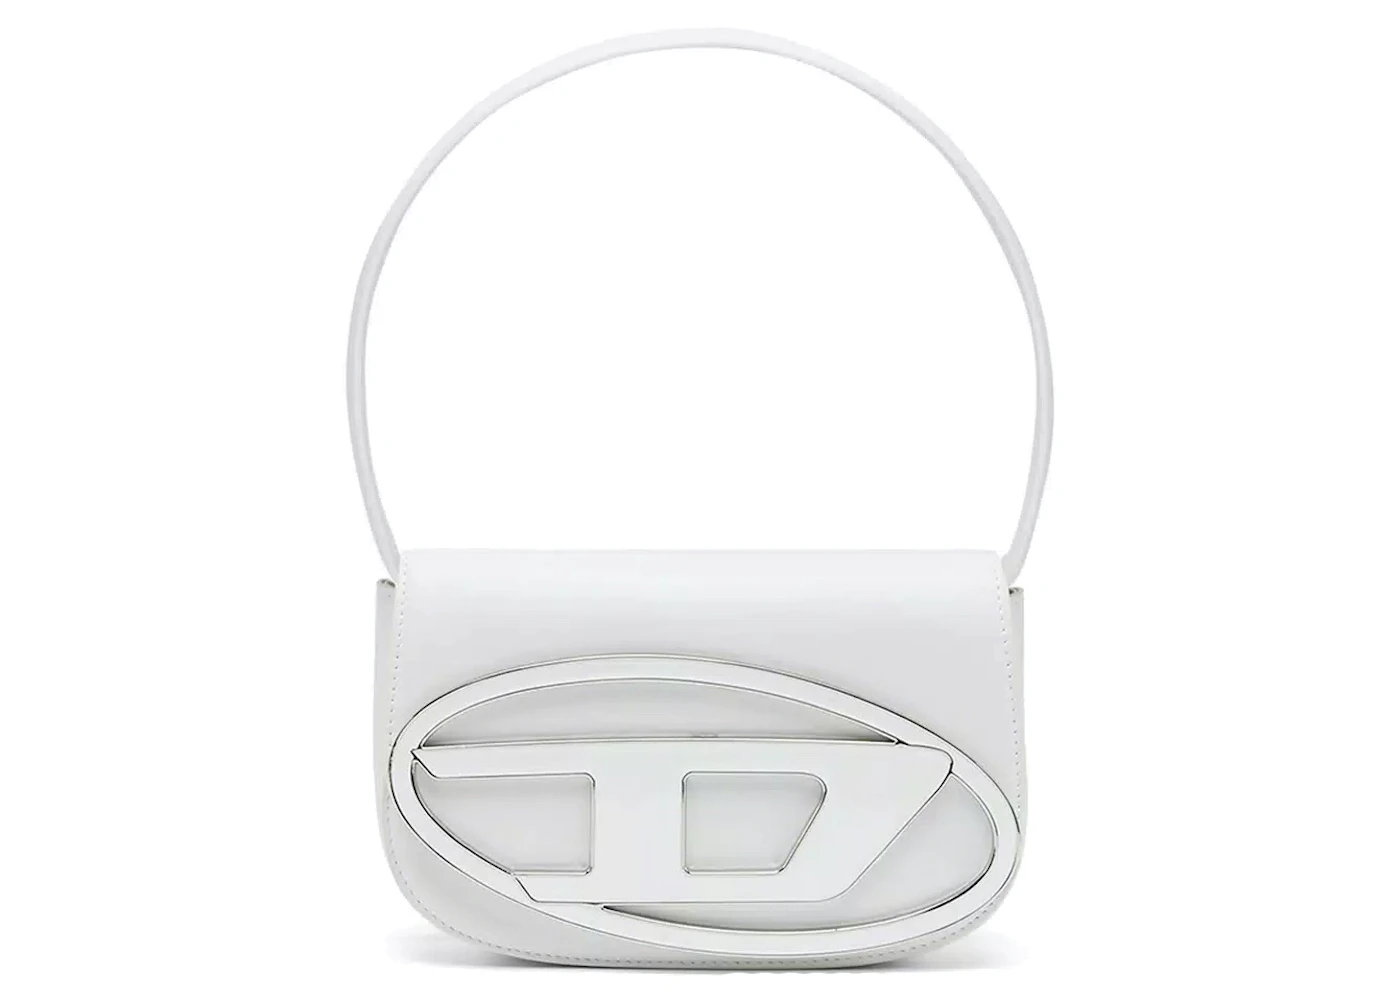 Diesel 1DR Shoulder Bag Nappa Leather White in Nappa Leather with ...